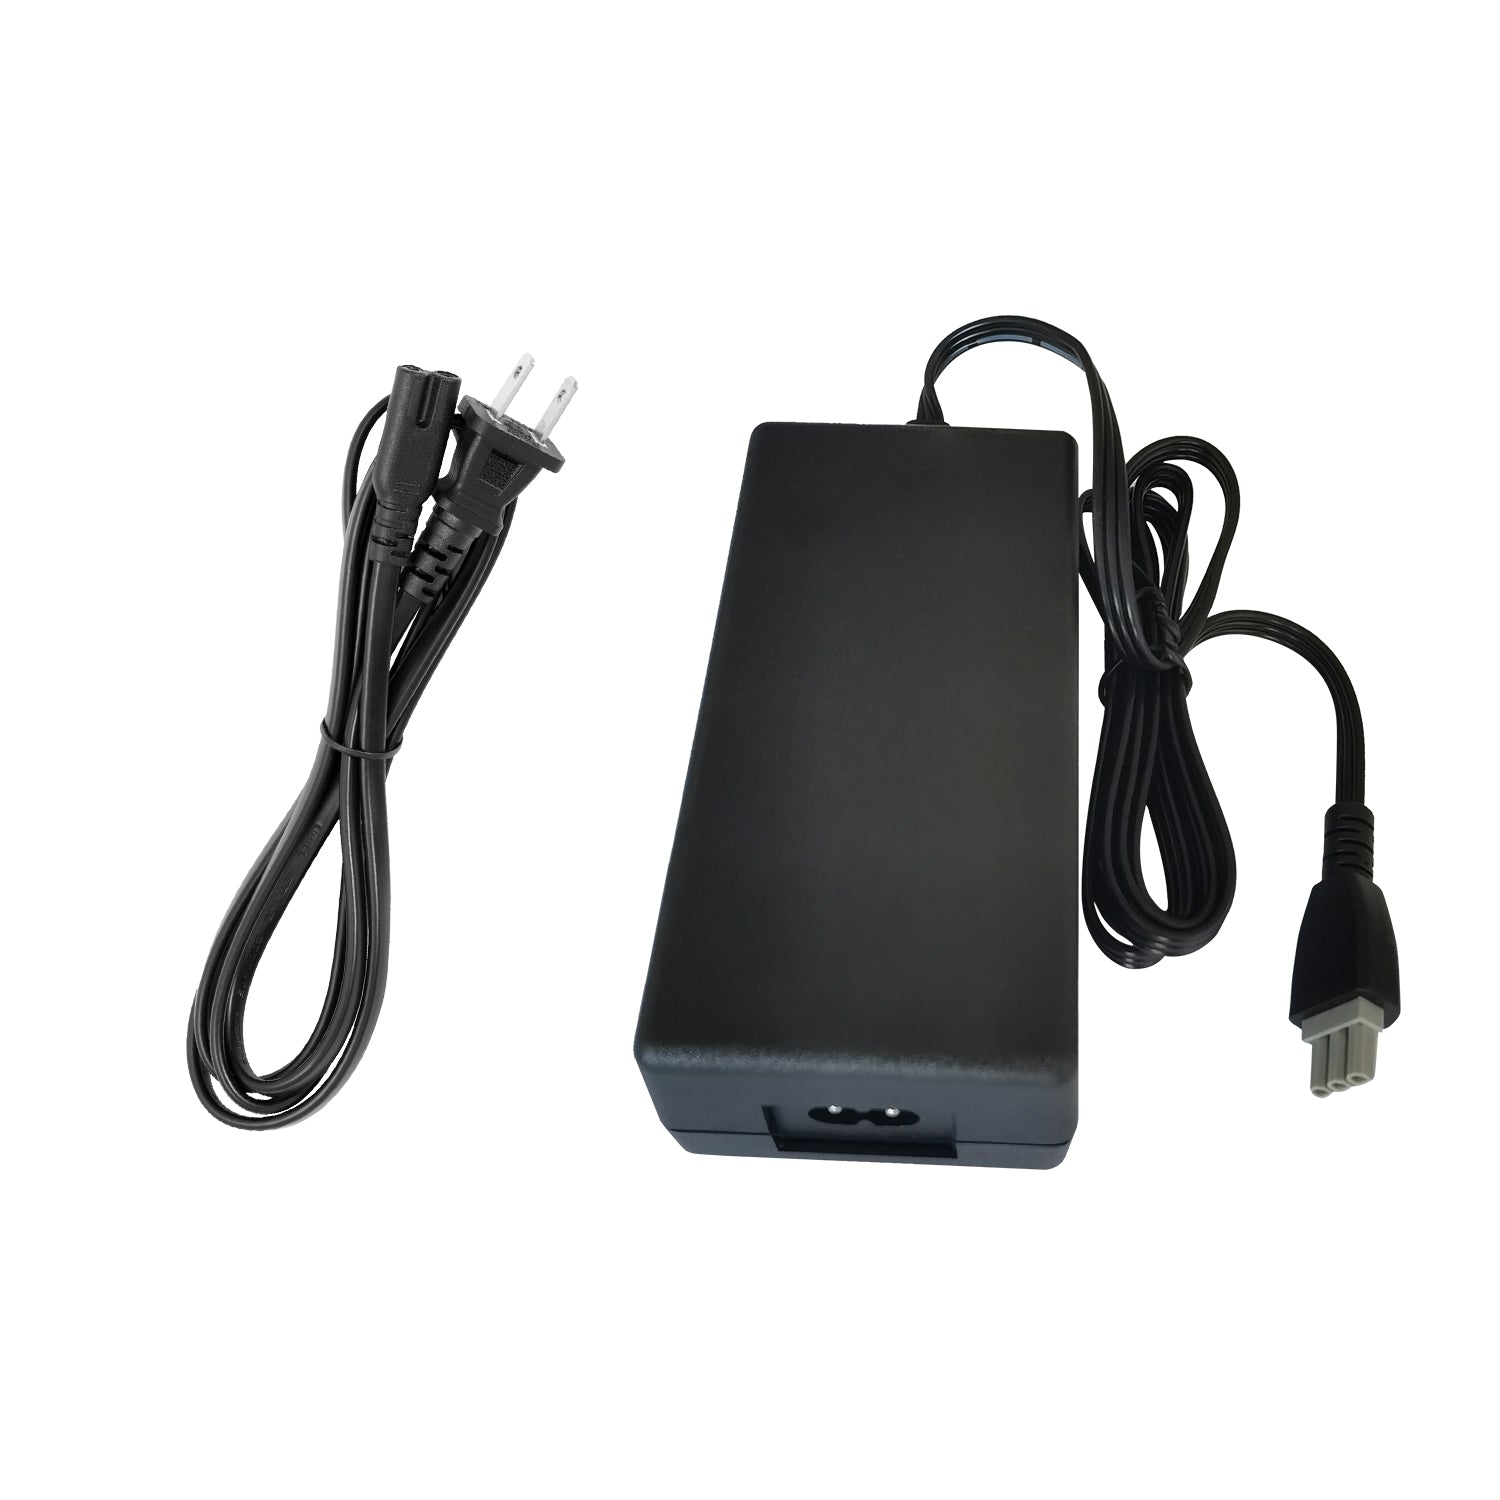 Power Adapter for hp psc 1603 Printer.